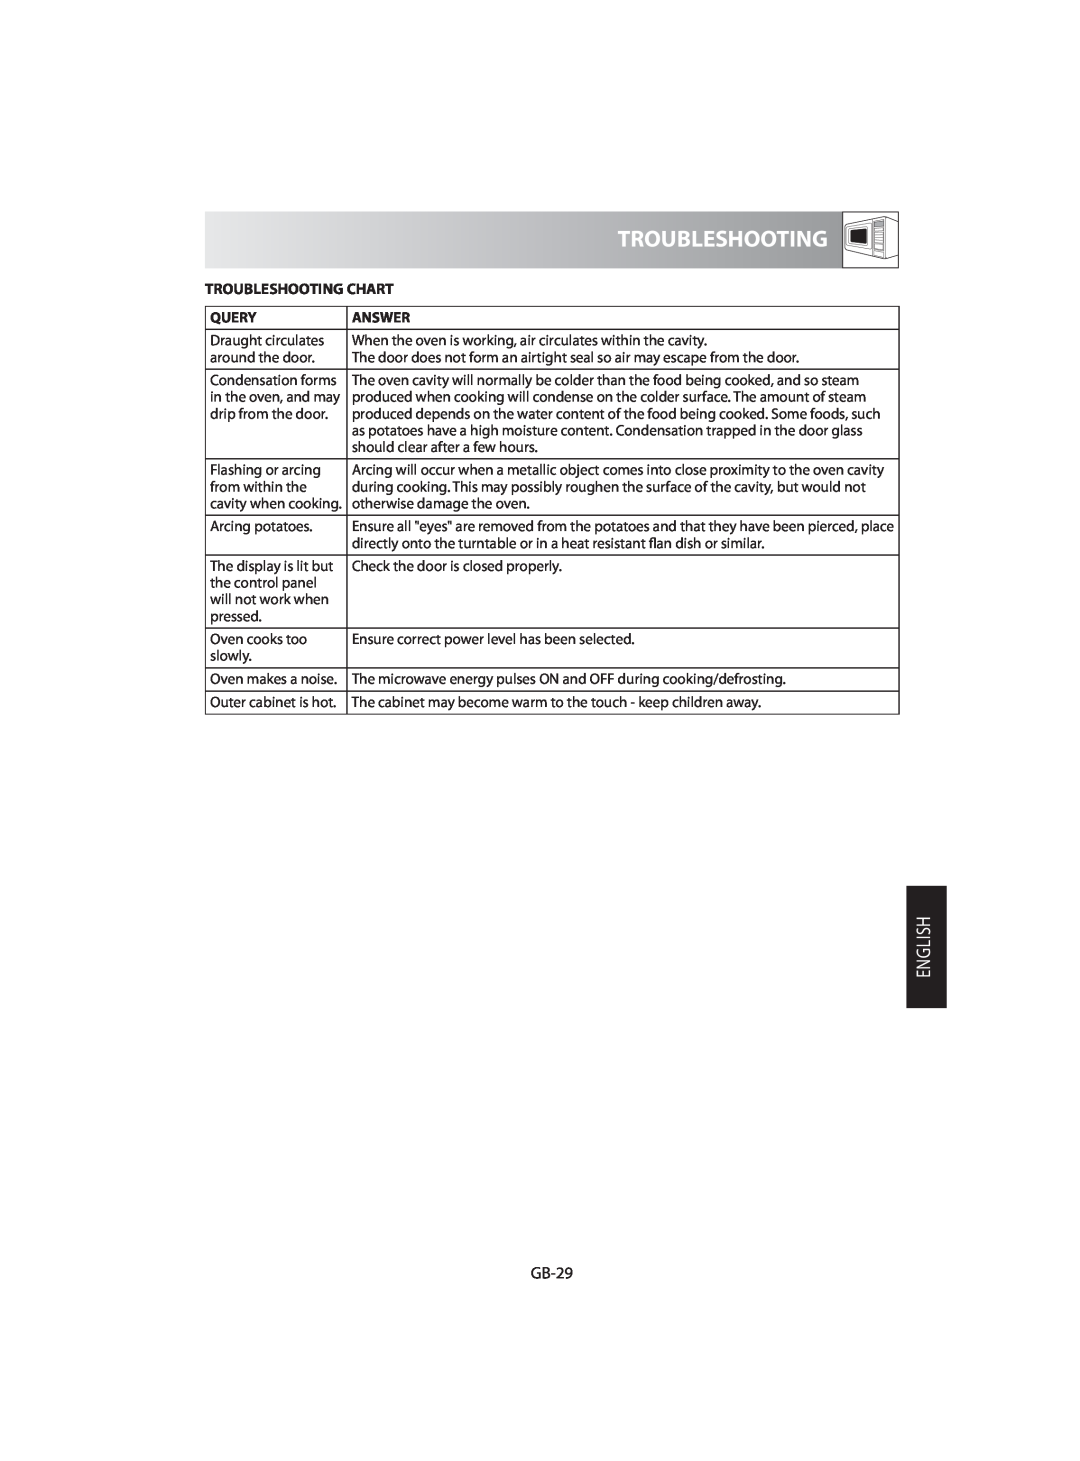 Sharp R-92STM operation manual English, GB-29, Troubleshooting Chart, Query, Answer 